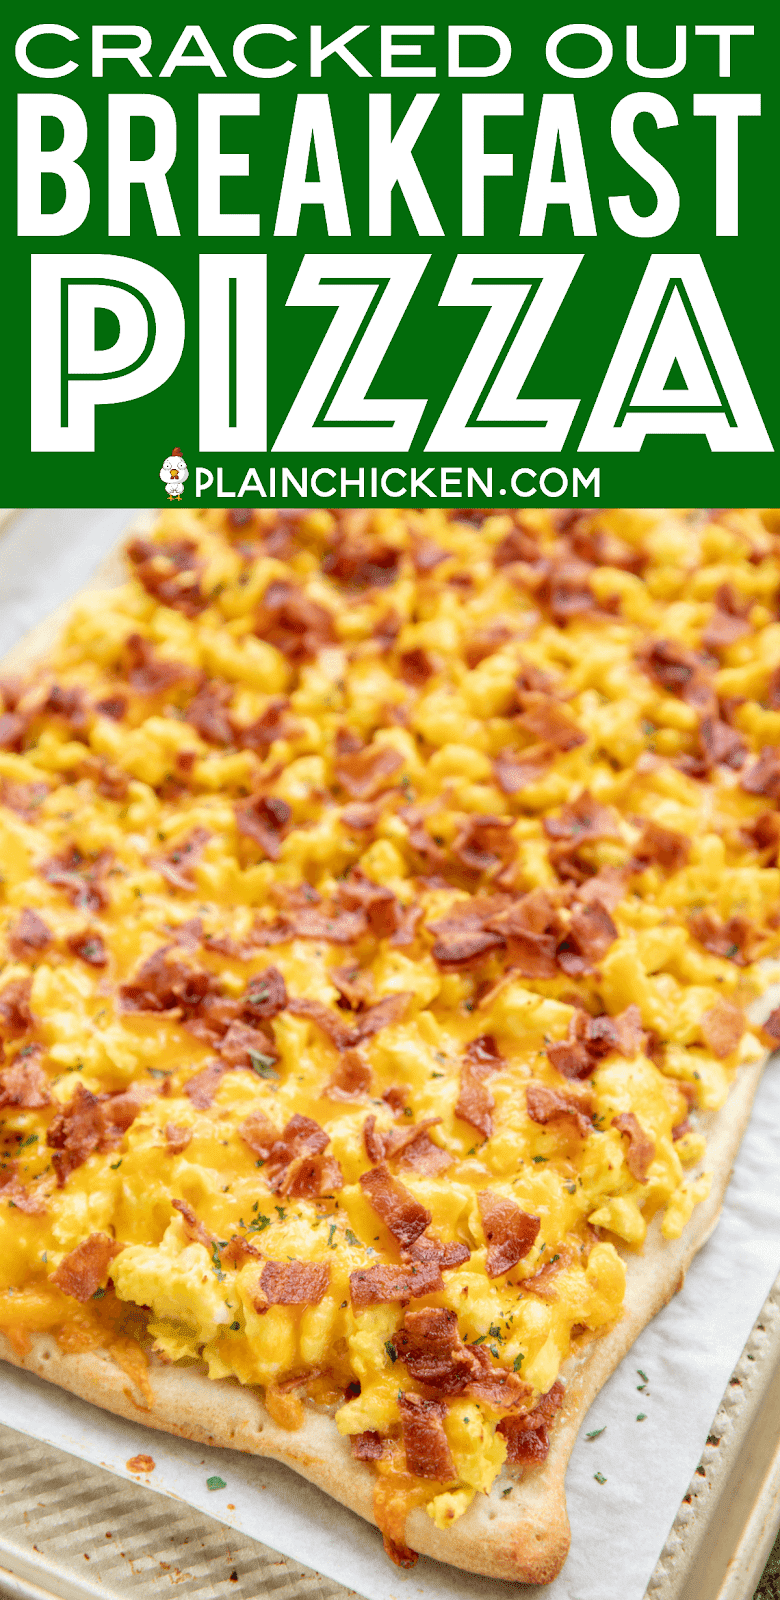 Cracked Out Breakfast Pizza - loaded with cheddar, bacon and Ranch! SO GOOD!!! Easy enough for a weekday breakfast. Refrigerated pizza crust topped with ranch dressing, scrambled eggs, bacon and cheddar cheese. We love this for breakfast, lunch and dinner. This is the most requested breakfast in our house. There are never any leftovers!! #breakfast #pizza #eggs #bacon #cheese